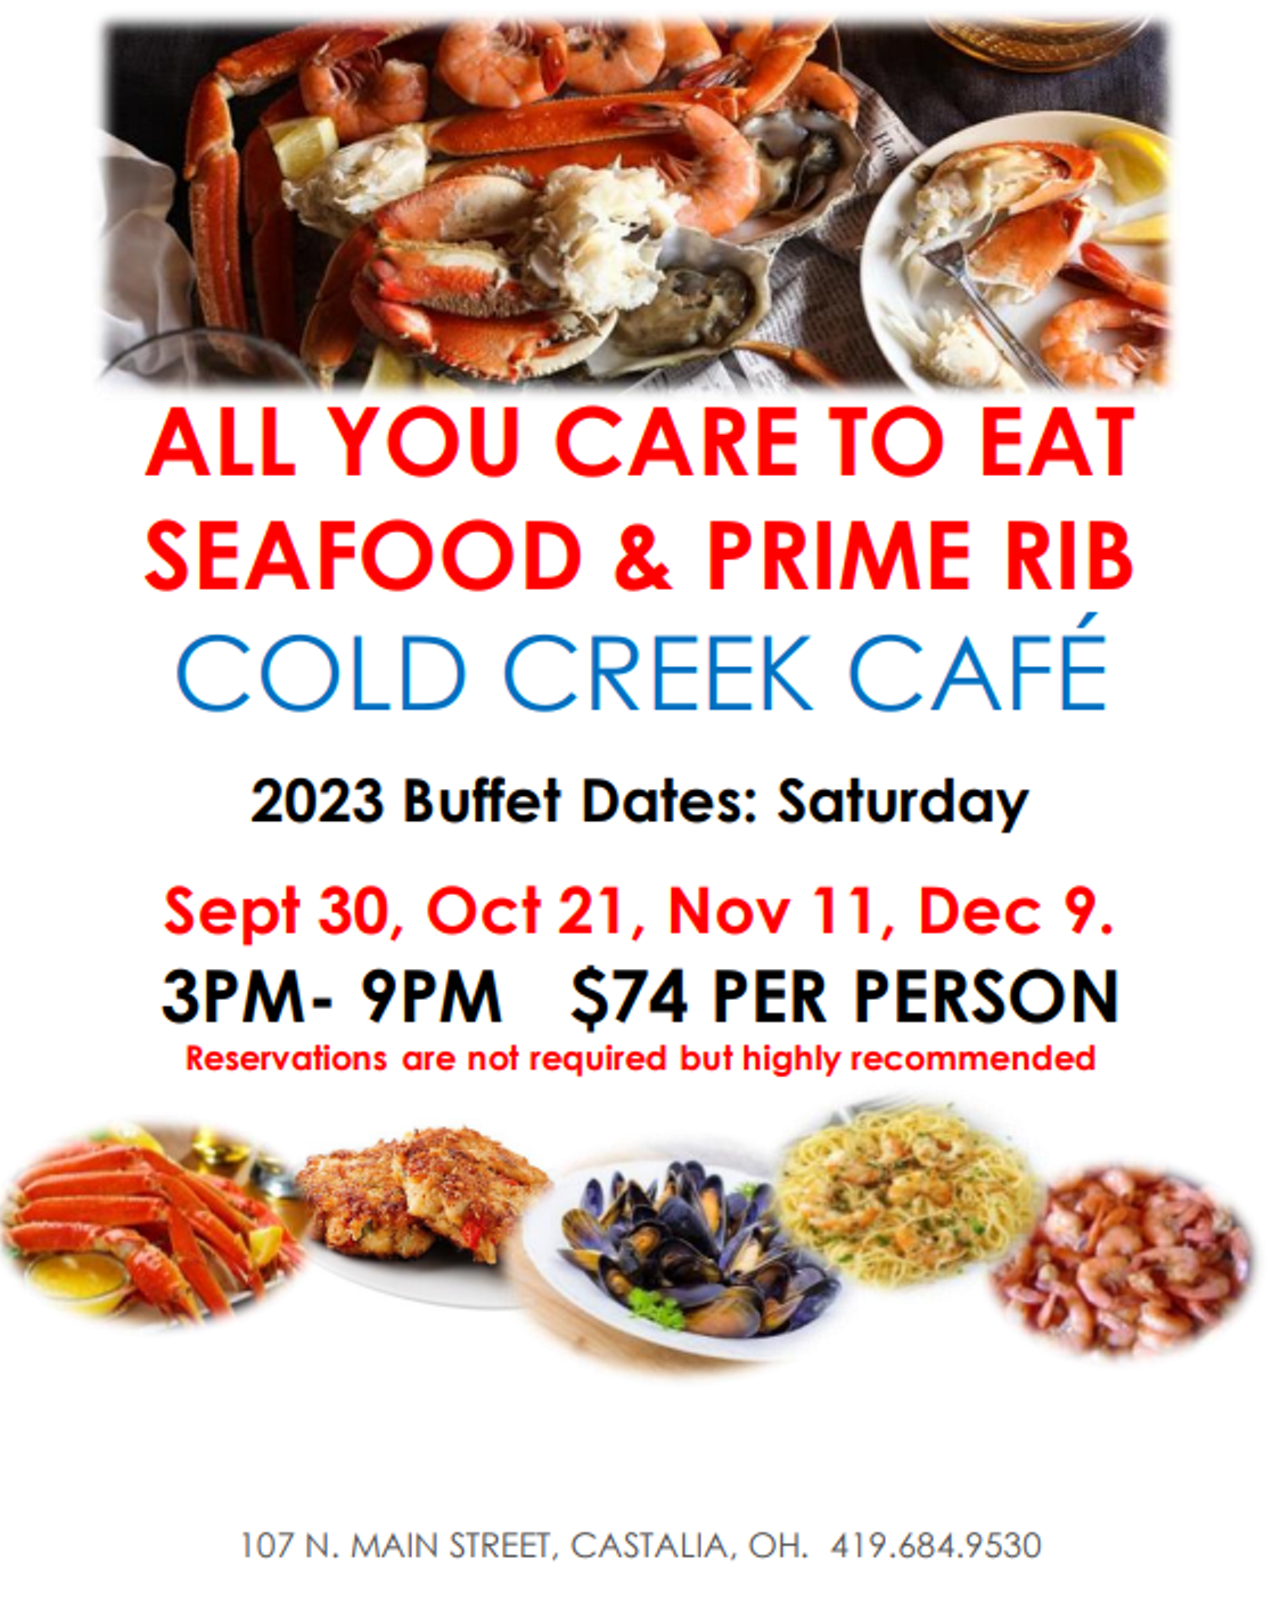 All You Care to Eat Seafood and Prime Rib Buffet Cold Creek Cafe Food/Drink Cleveland Scene pic image